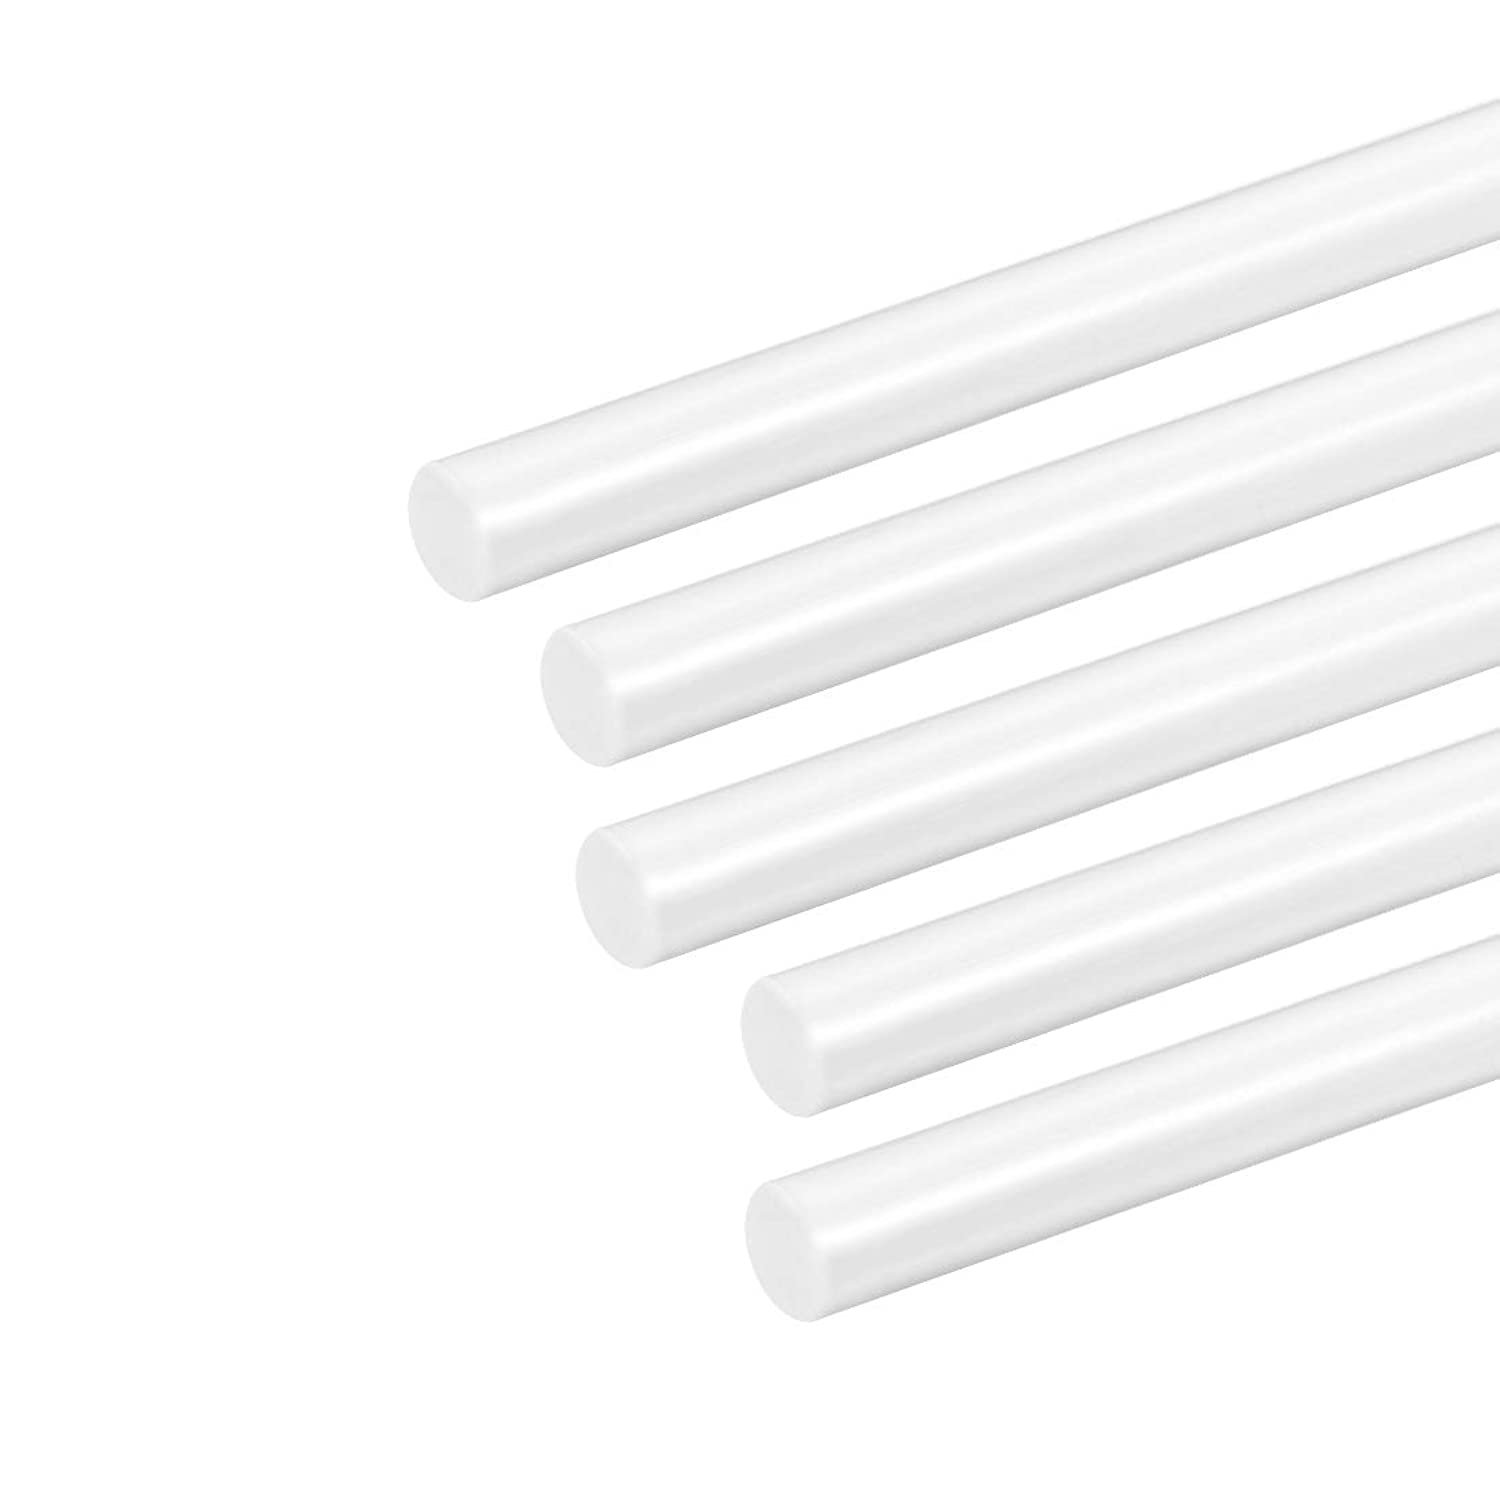 uxcell ABS Styrene Plastic Round Bar Rod,1/4 inch Dia 20 inch Length,White for Architectu